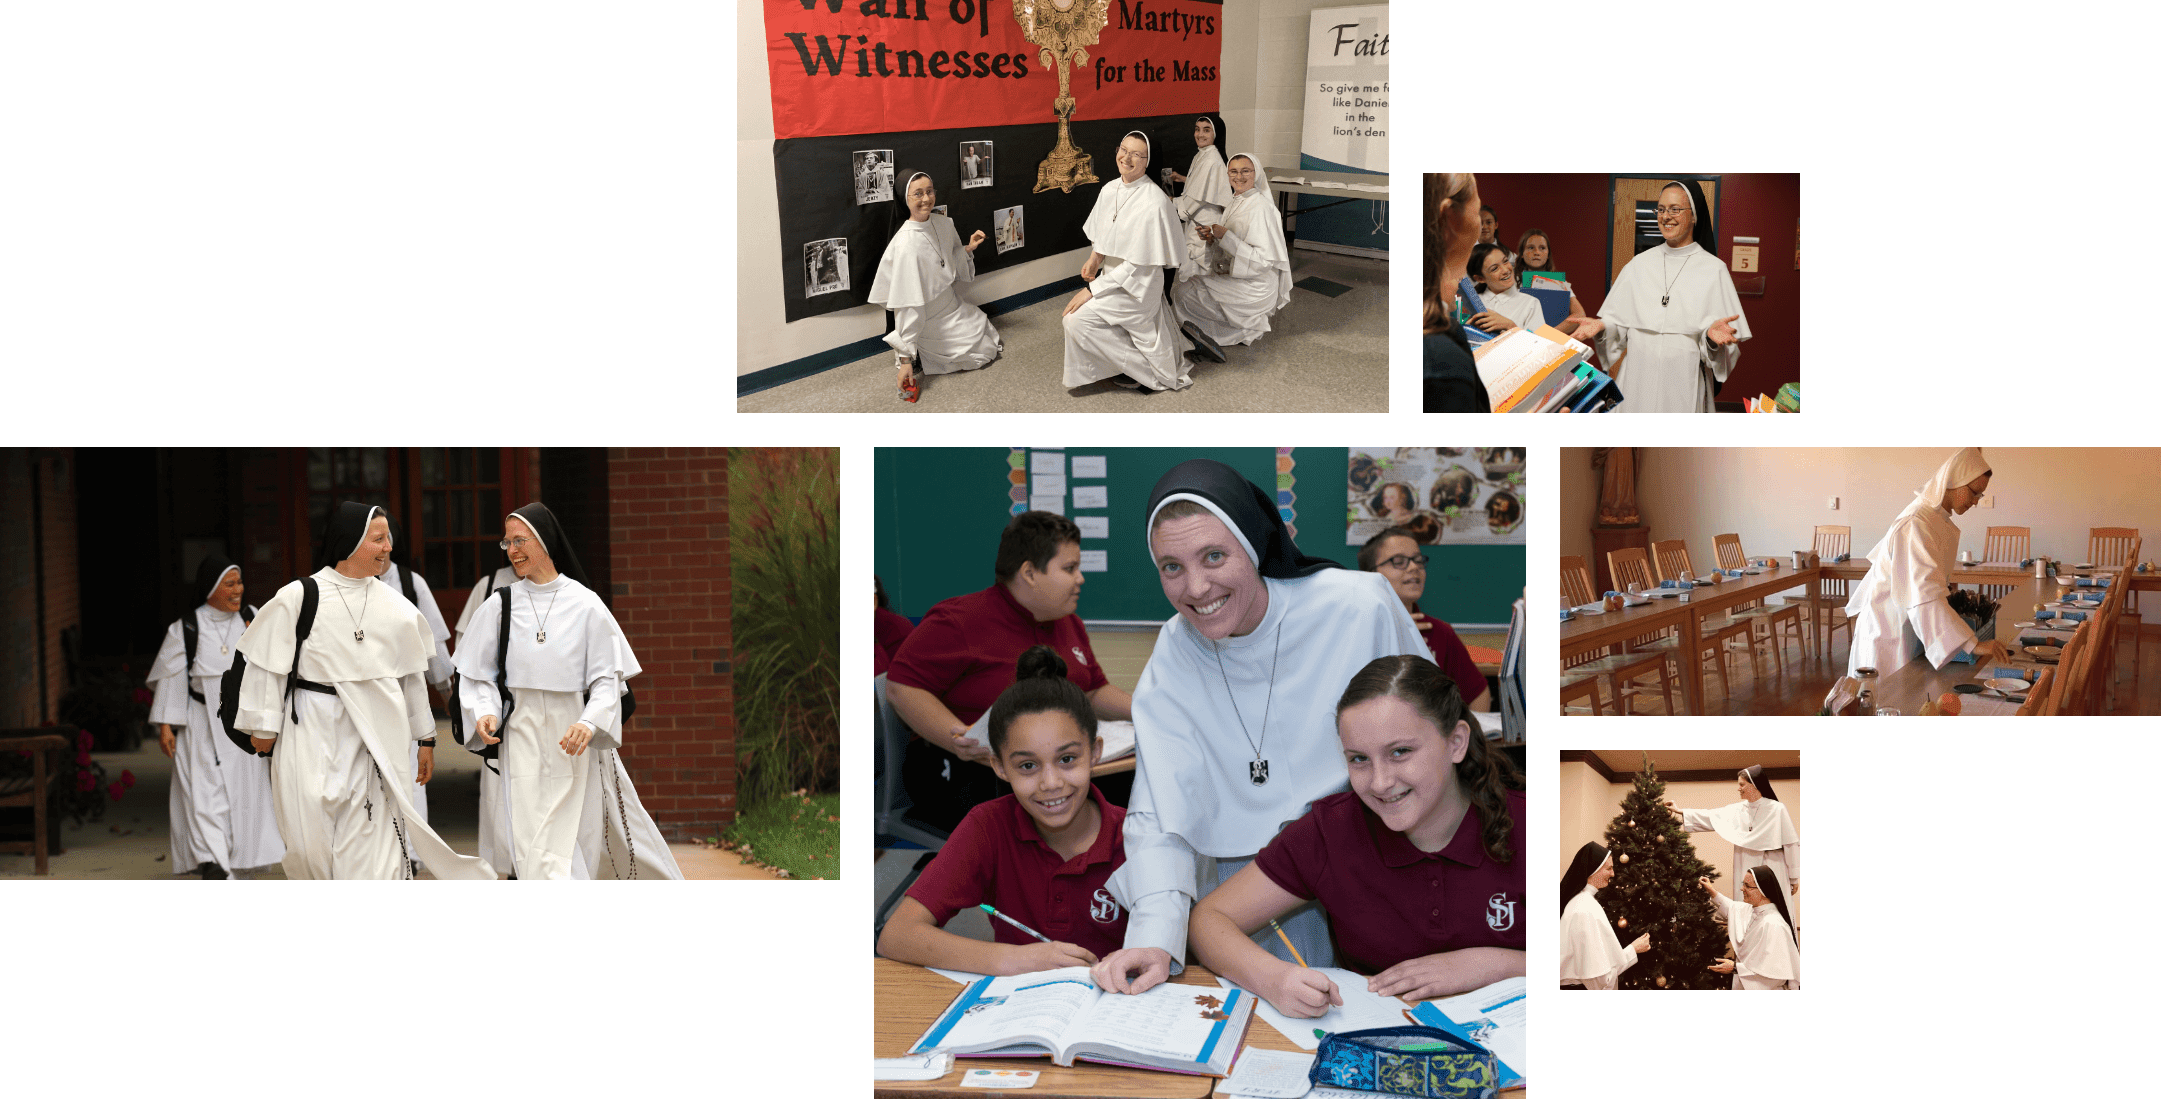 dominican sisters catholic religious vocations women prayer faith Day Collage 2